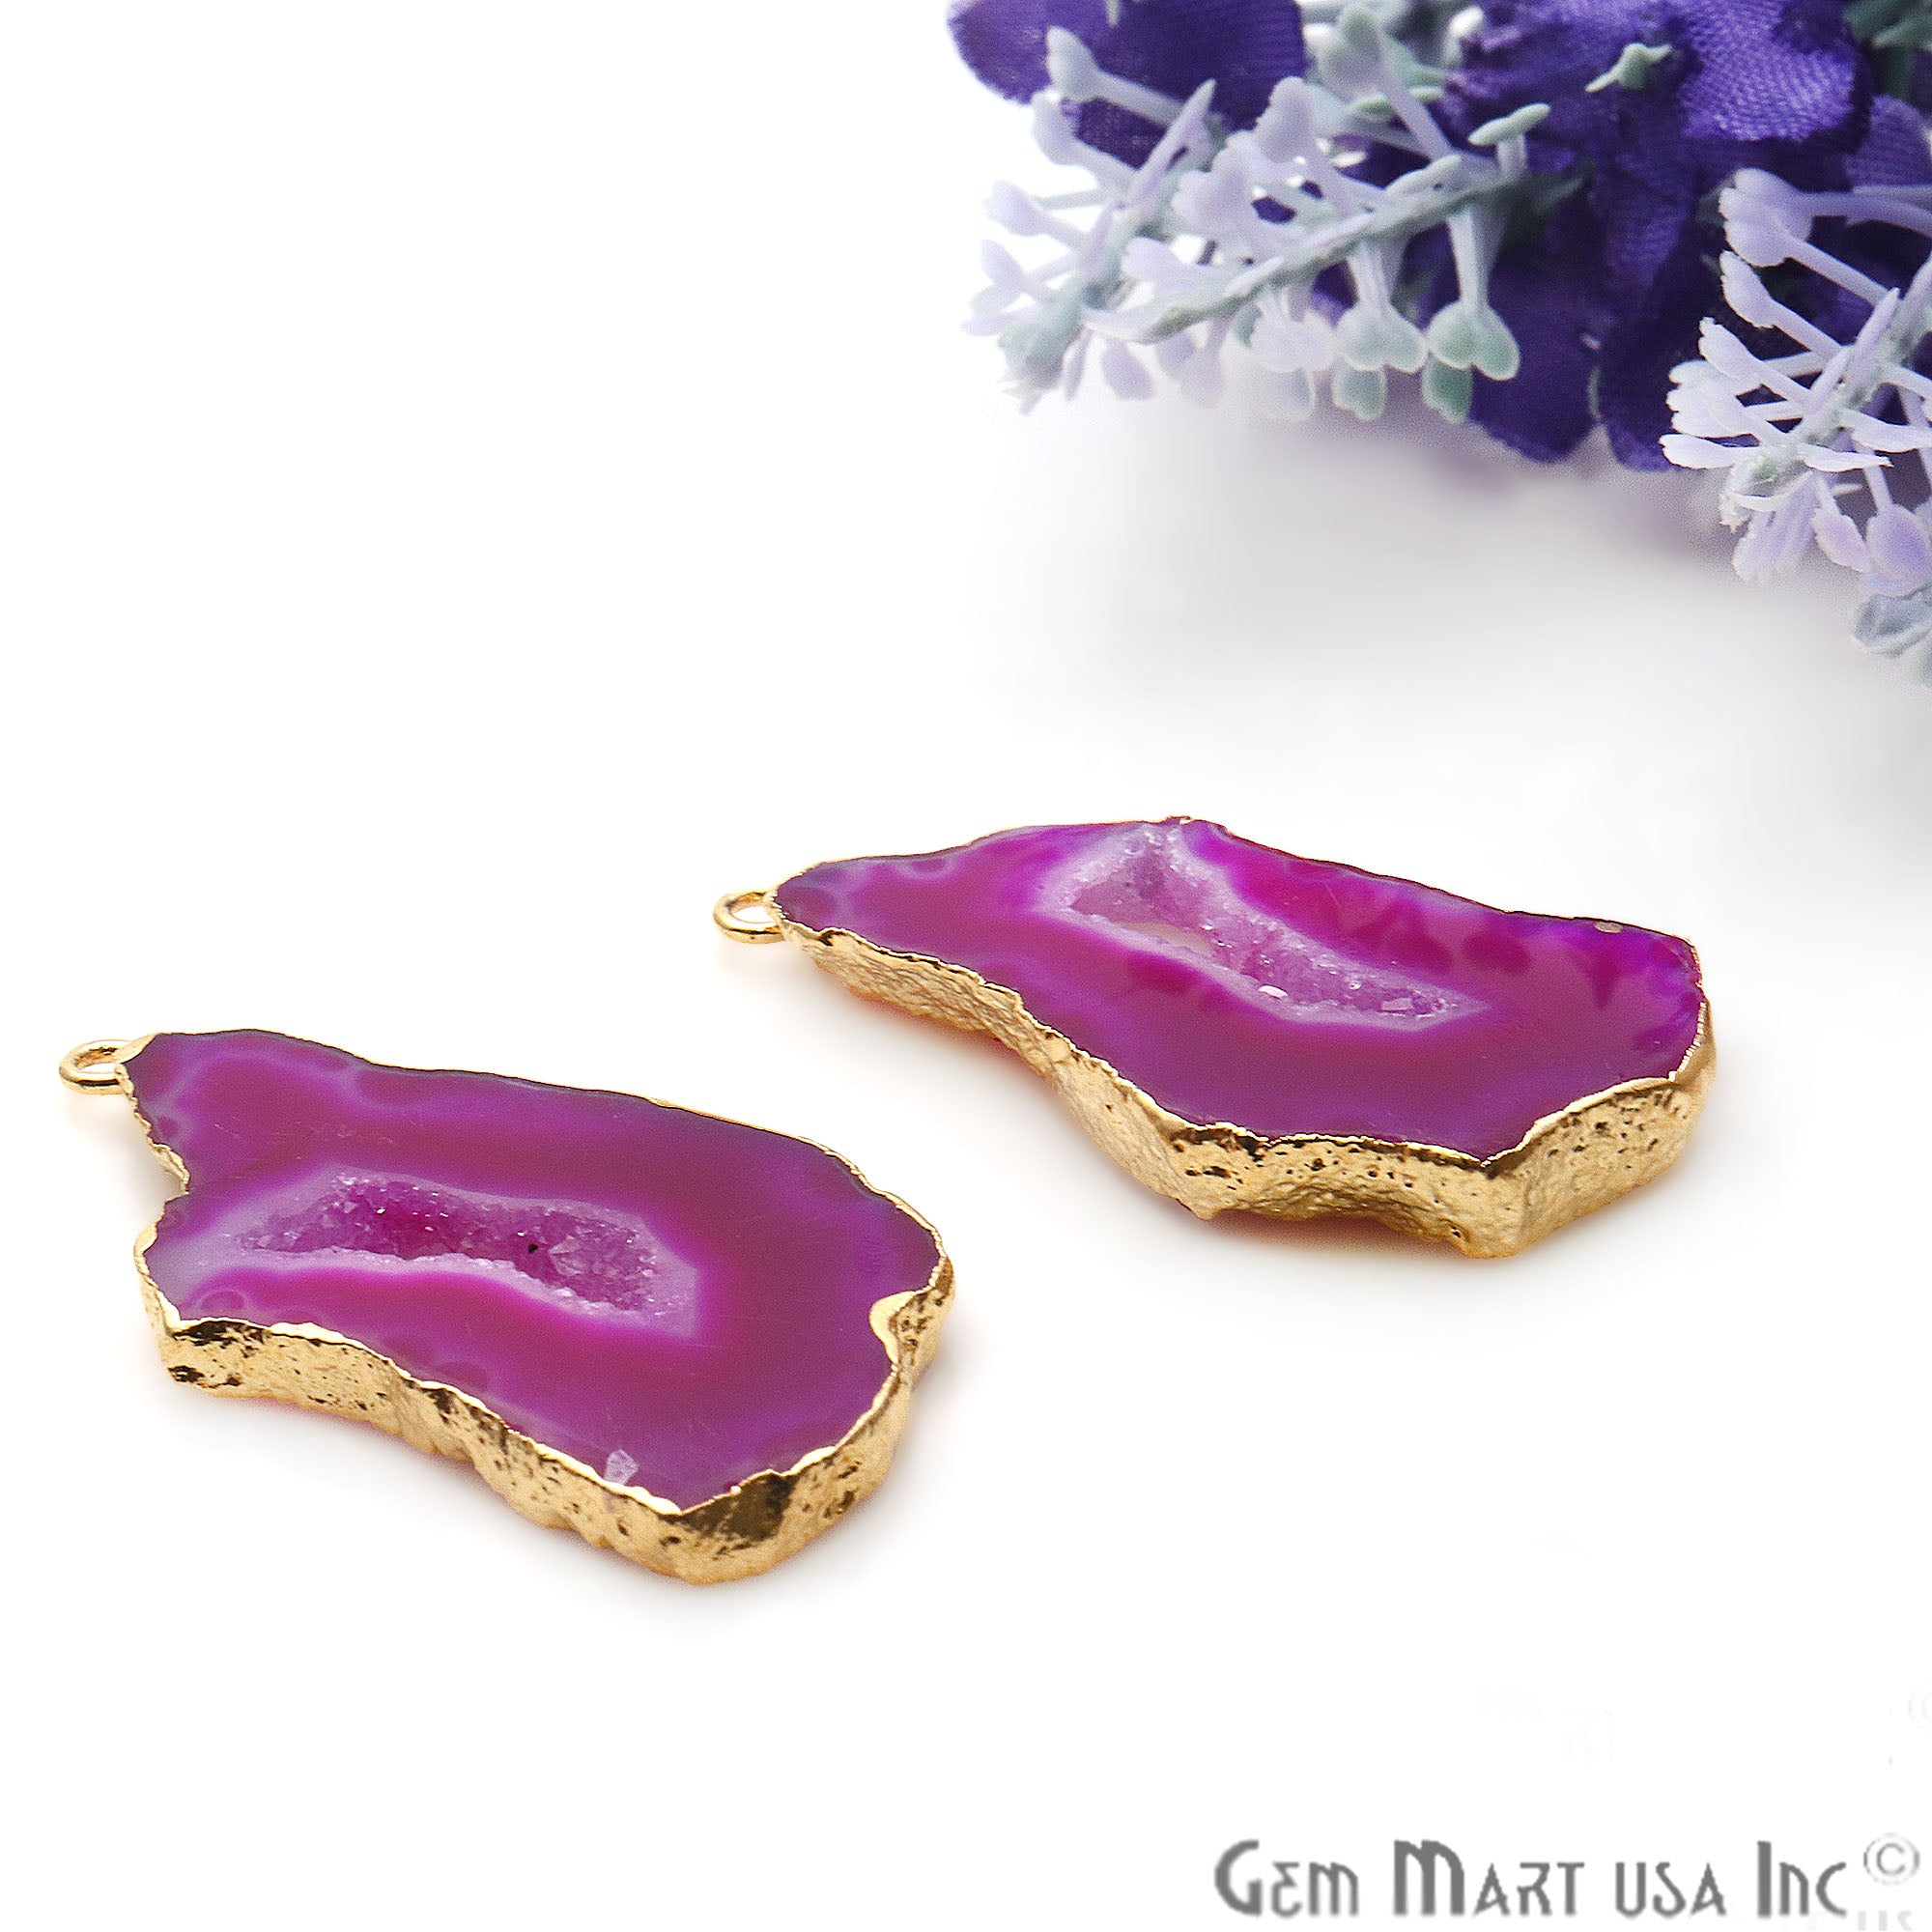 Agate Slice 34x17mm Organic Gold Electroplated Gemstone Earring Connector 1 Pair - GemMartUSA